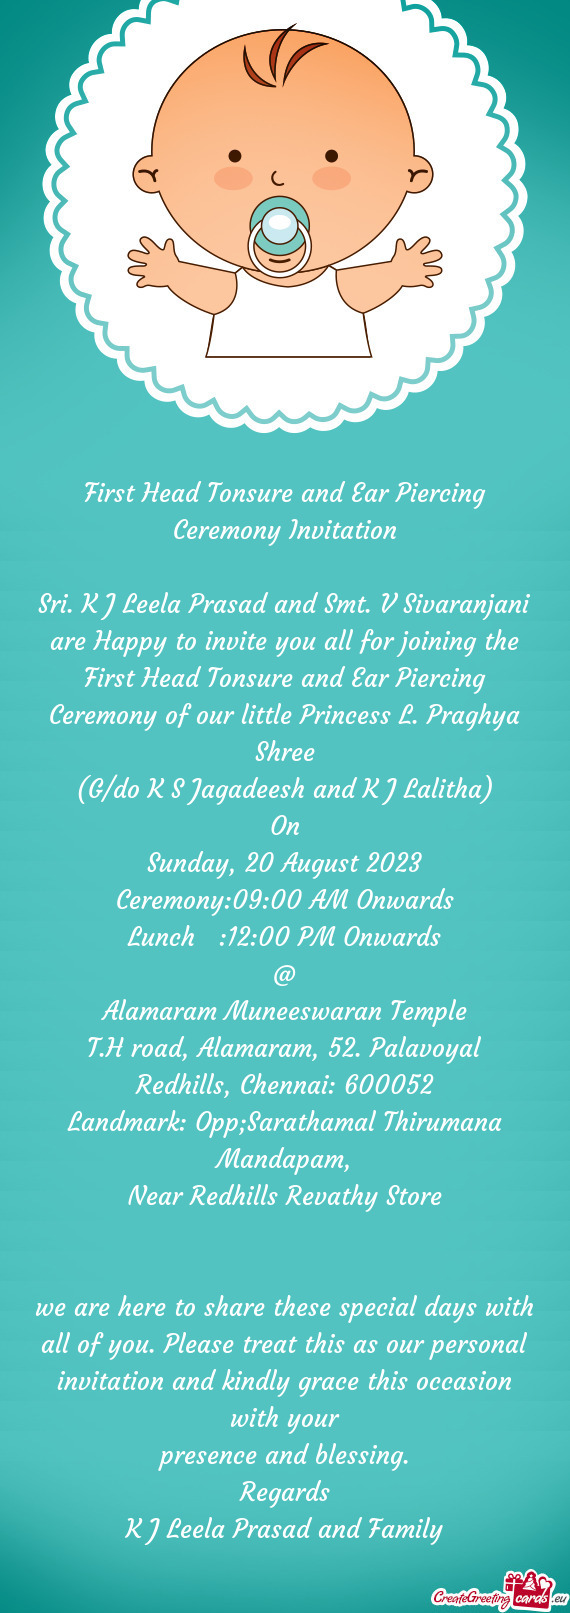 Sri. K J Leela Prasad and Smt. V Sivaranjani are Happy to invite you all for joining the First Head